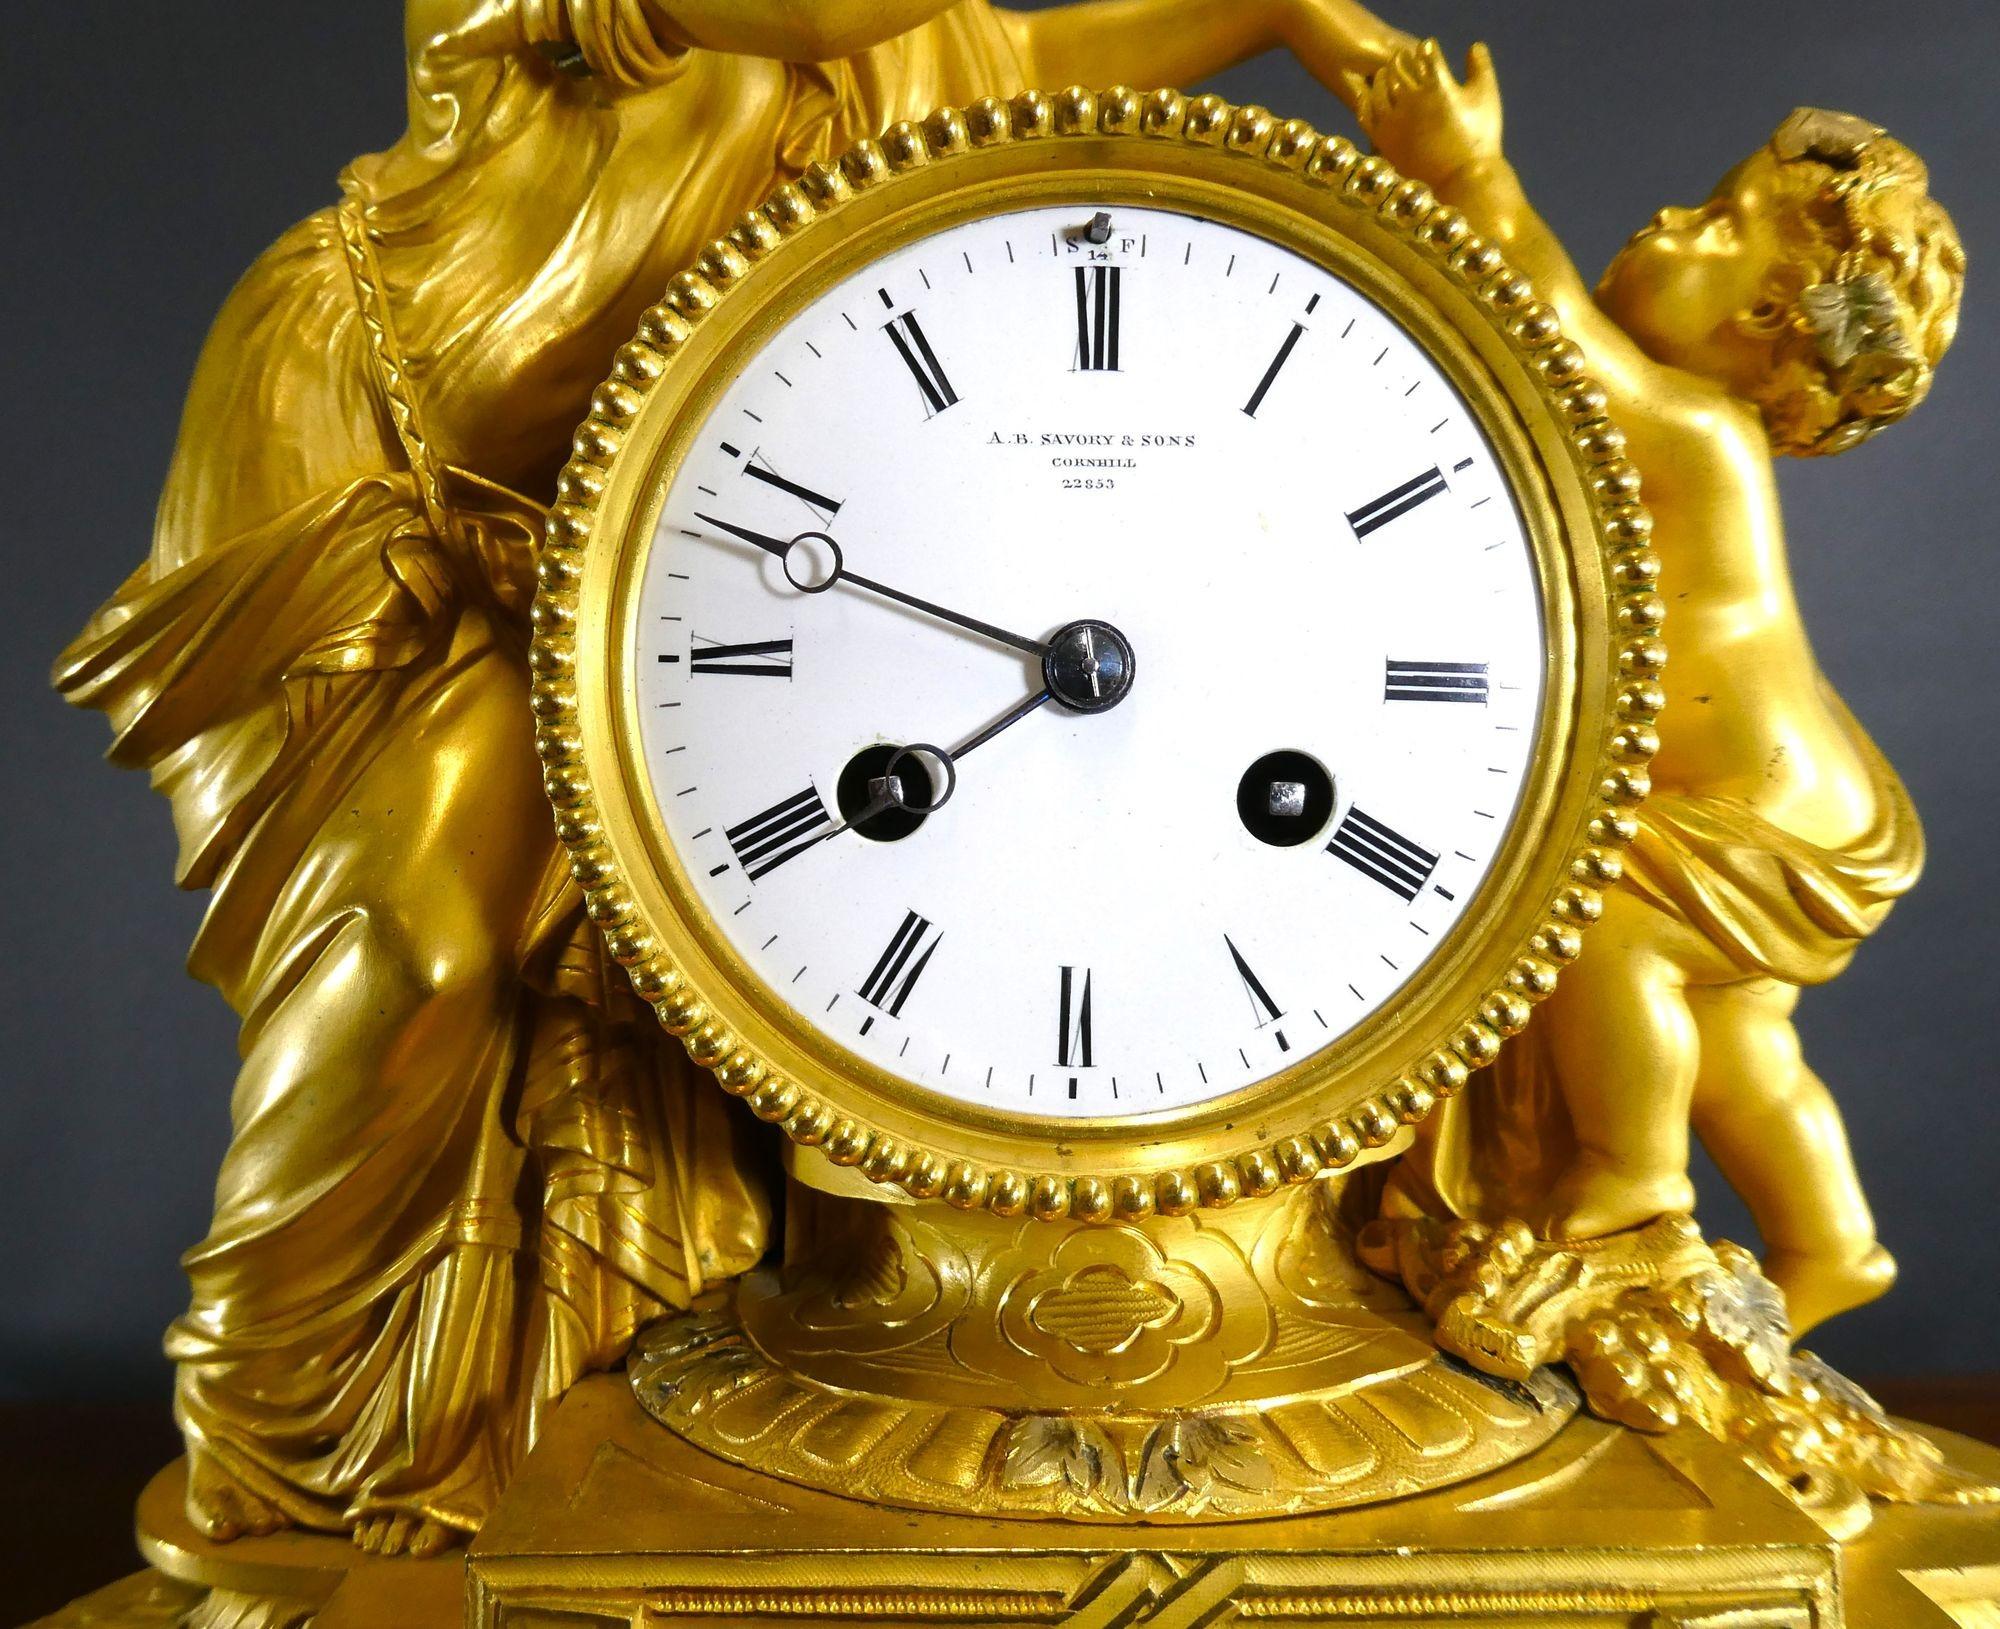 Ormolu and Porcelain Panel Mantel Clock, A.B.Savory, Cornhill In Good Condition For Sale In Norwich, GB